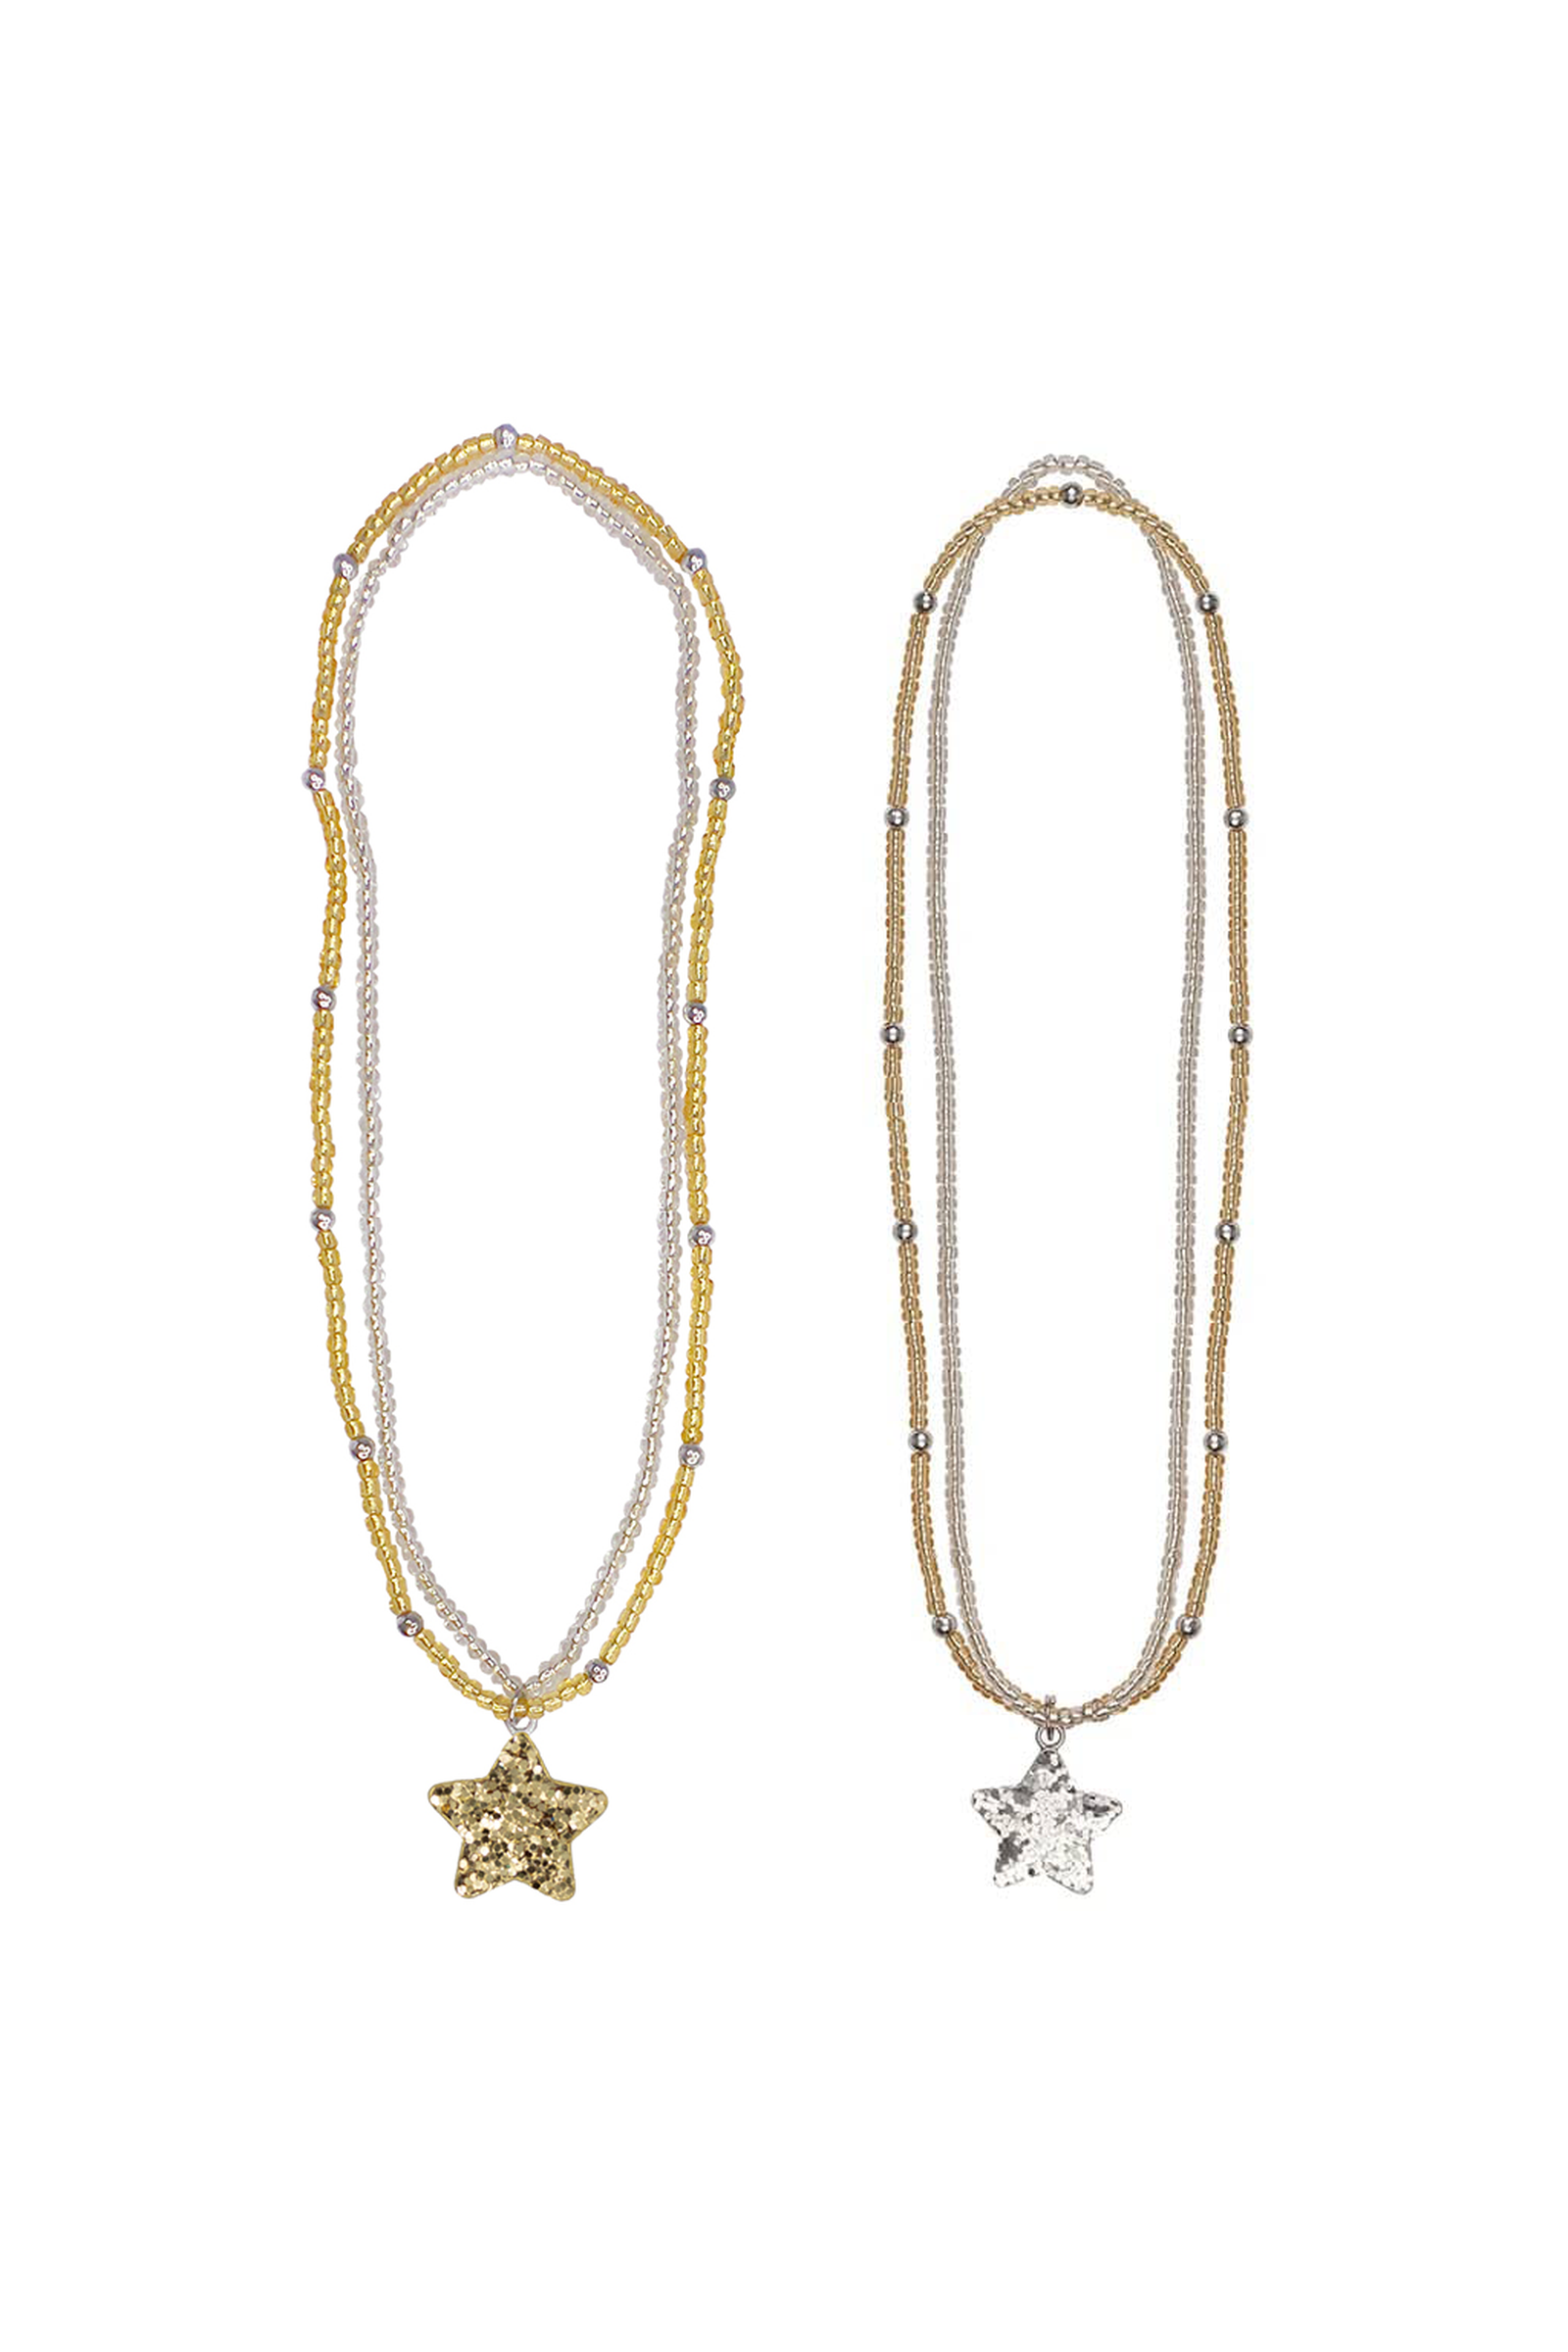 Pixie Perfect Stars Necklace